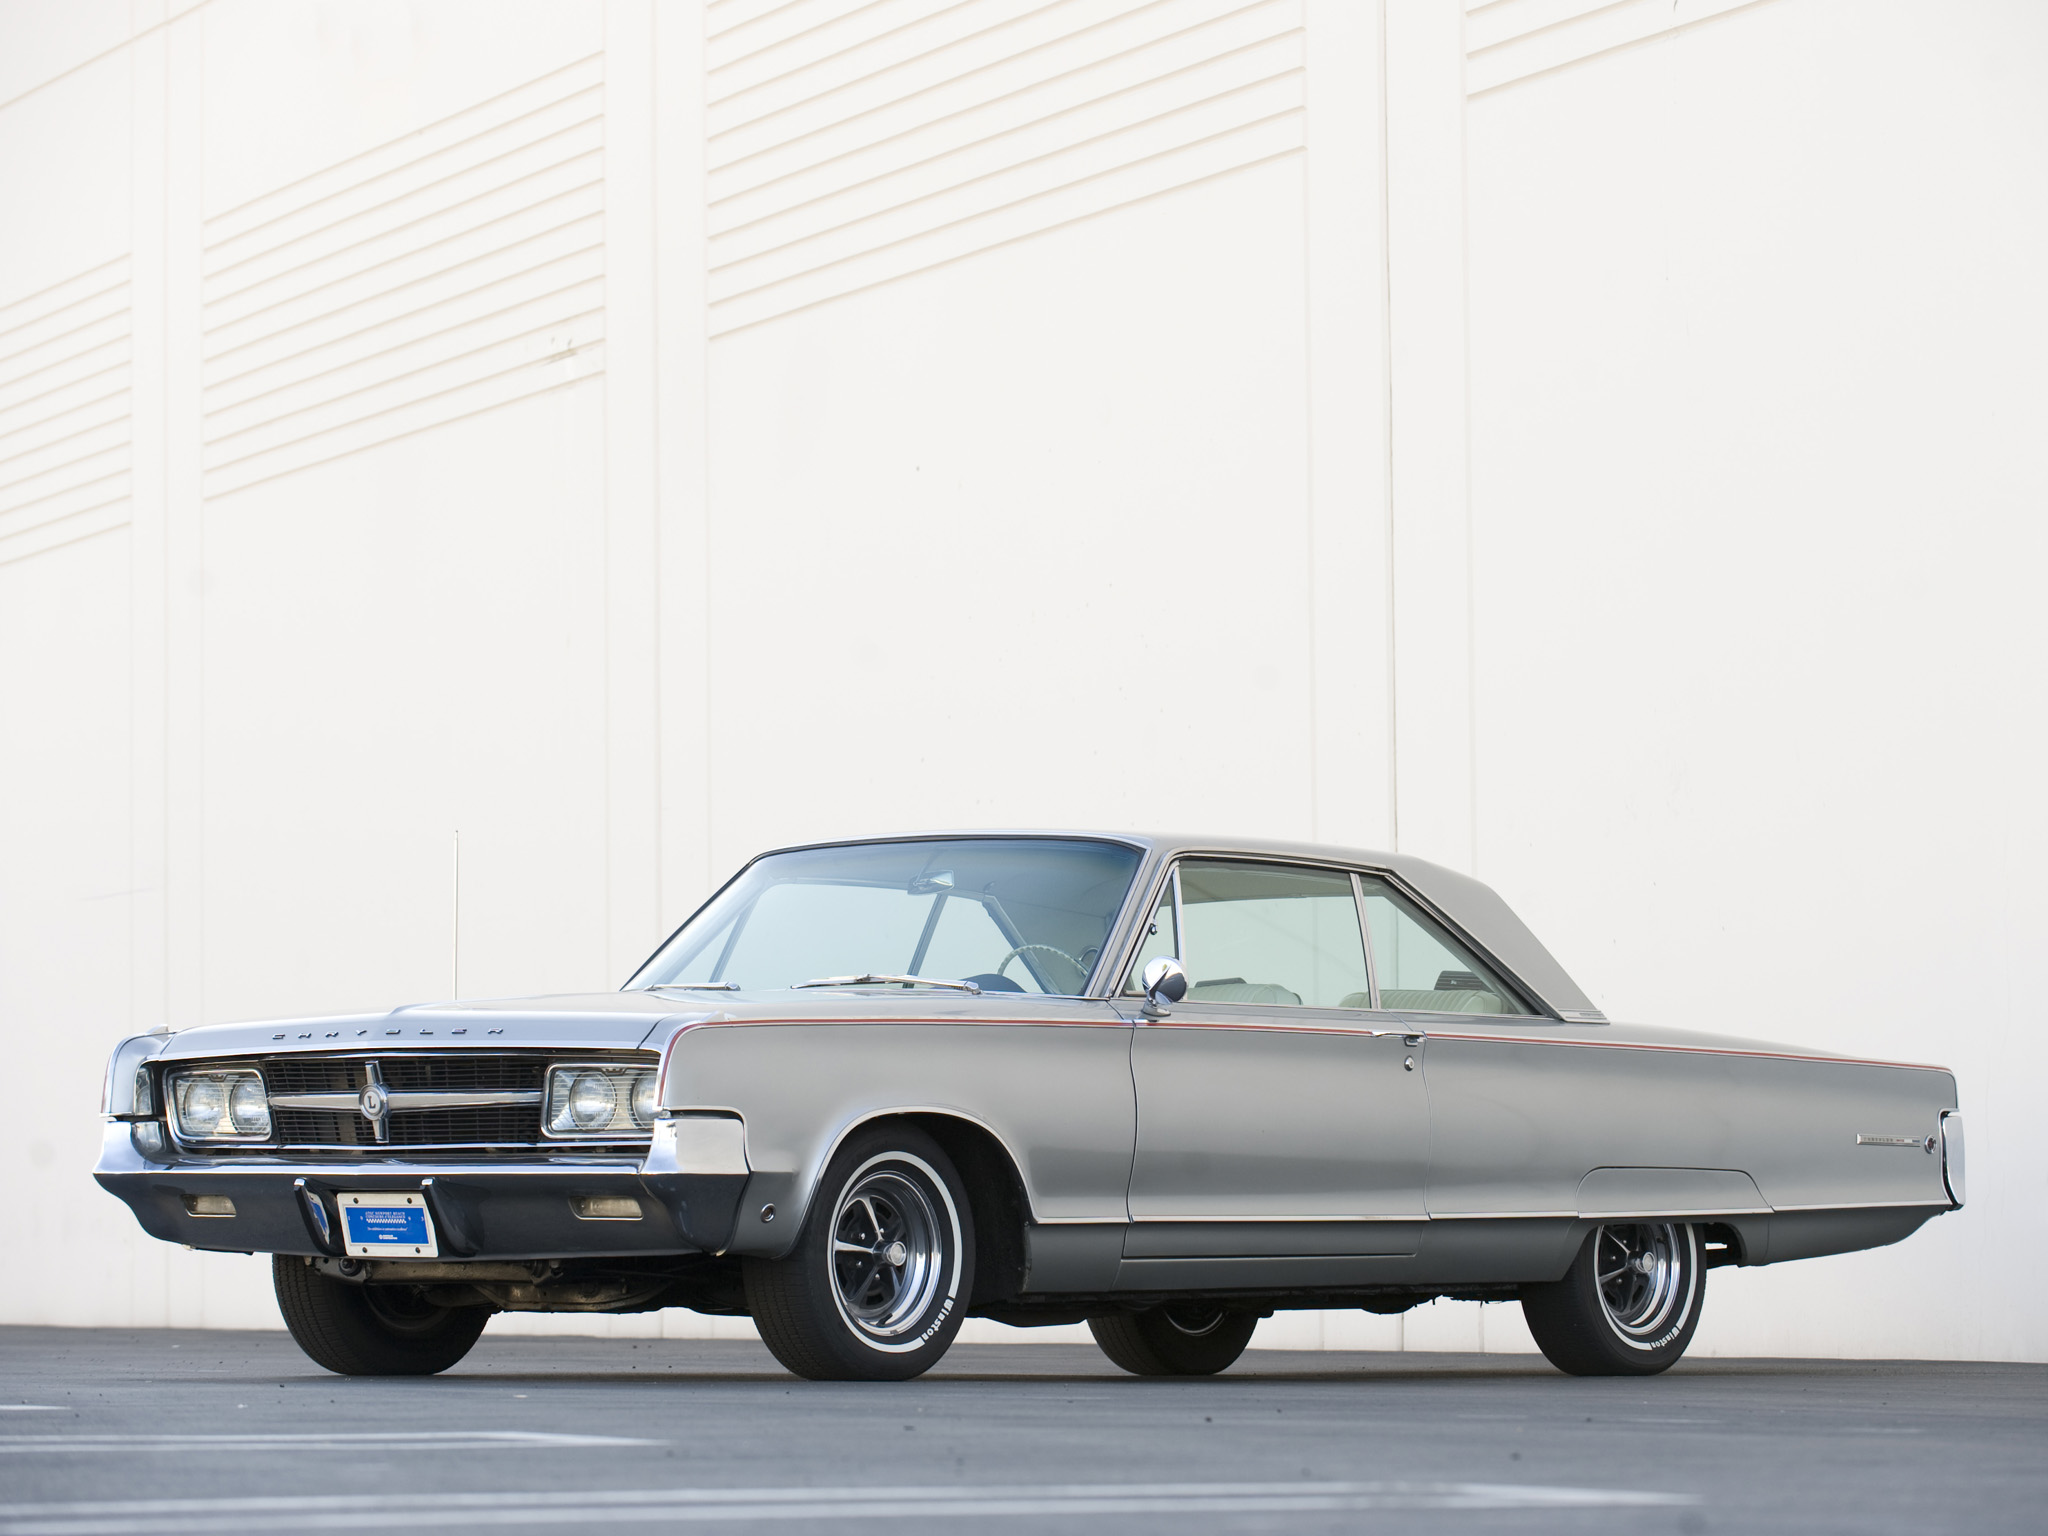 1965, Chrysler, 300l, Hardtop, Coupe, Luxury, Classic Wallpaper